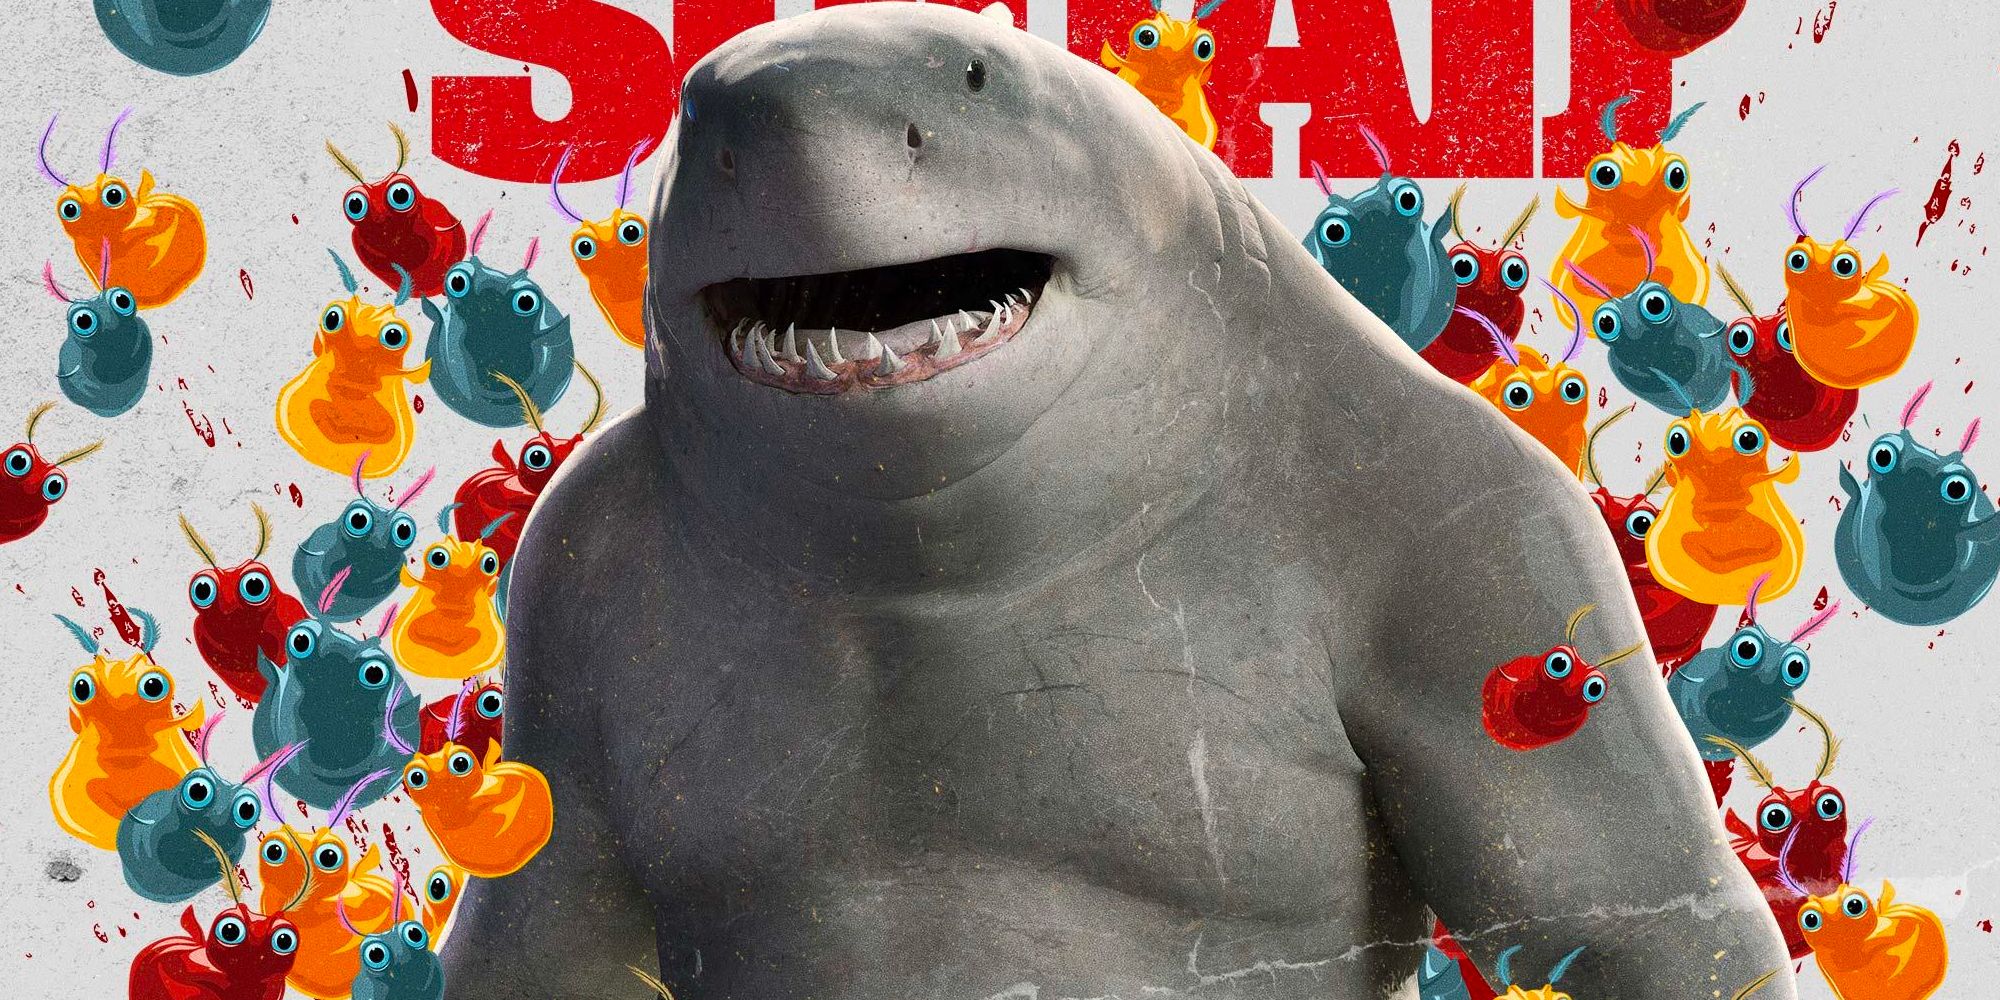 King Shark poster for The Suicide Squad